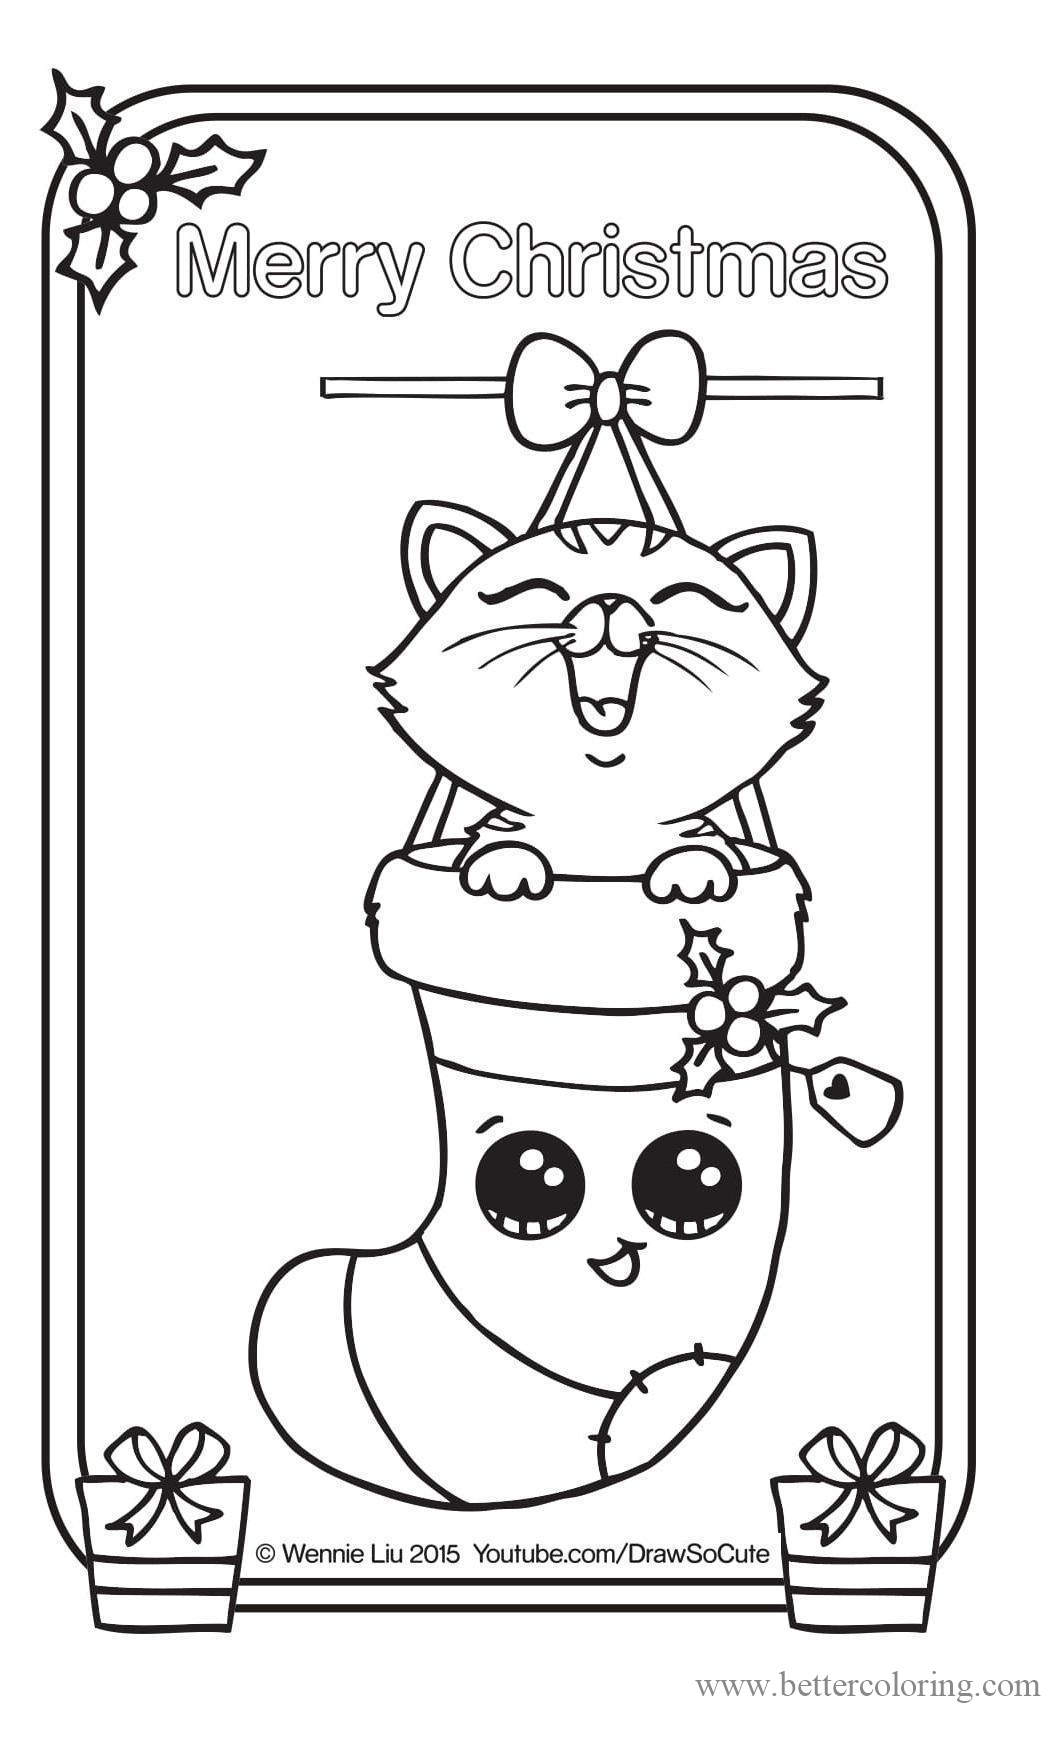 Draw So Cute Christmas Kitten Coloring Pages - Free Printable Coloring